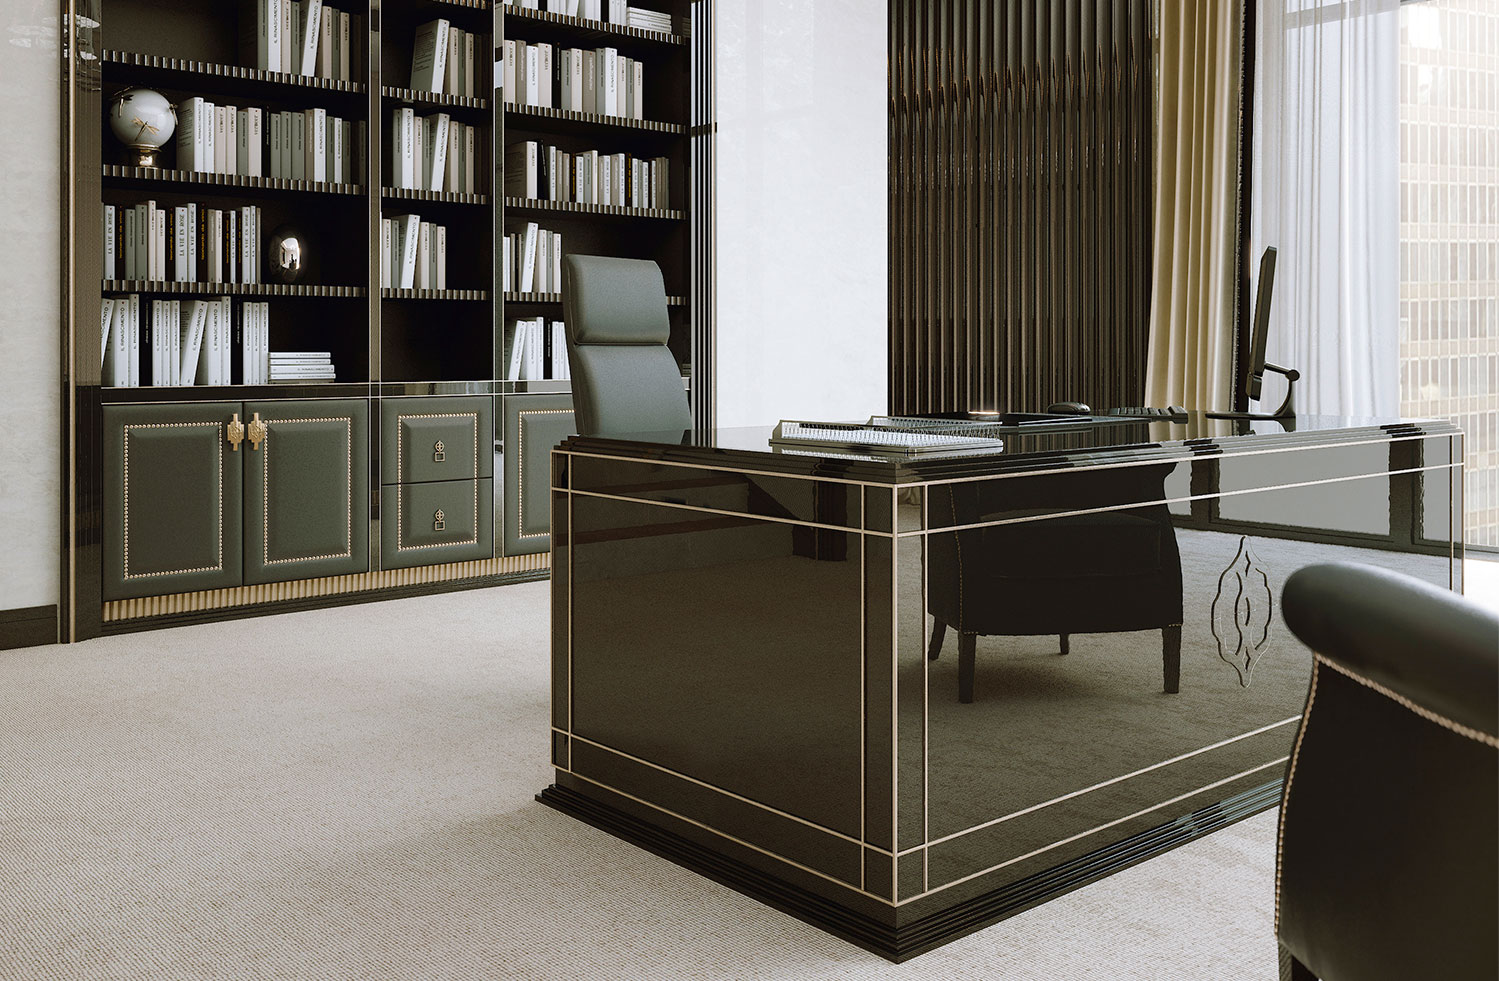 luxury furniture complements